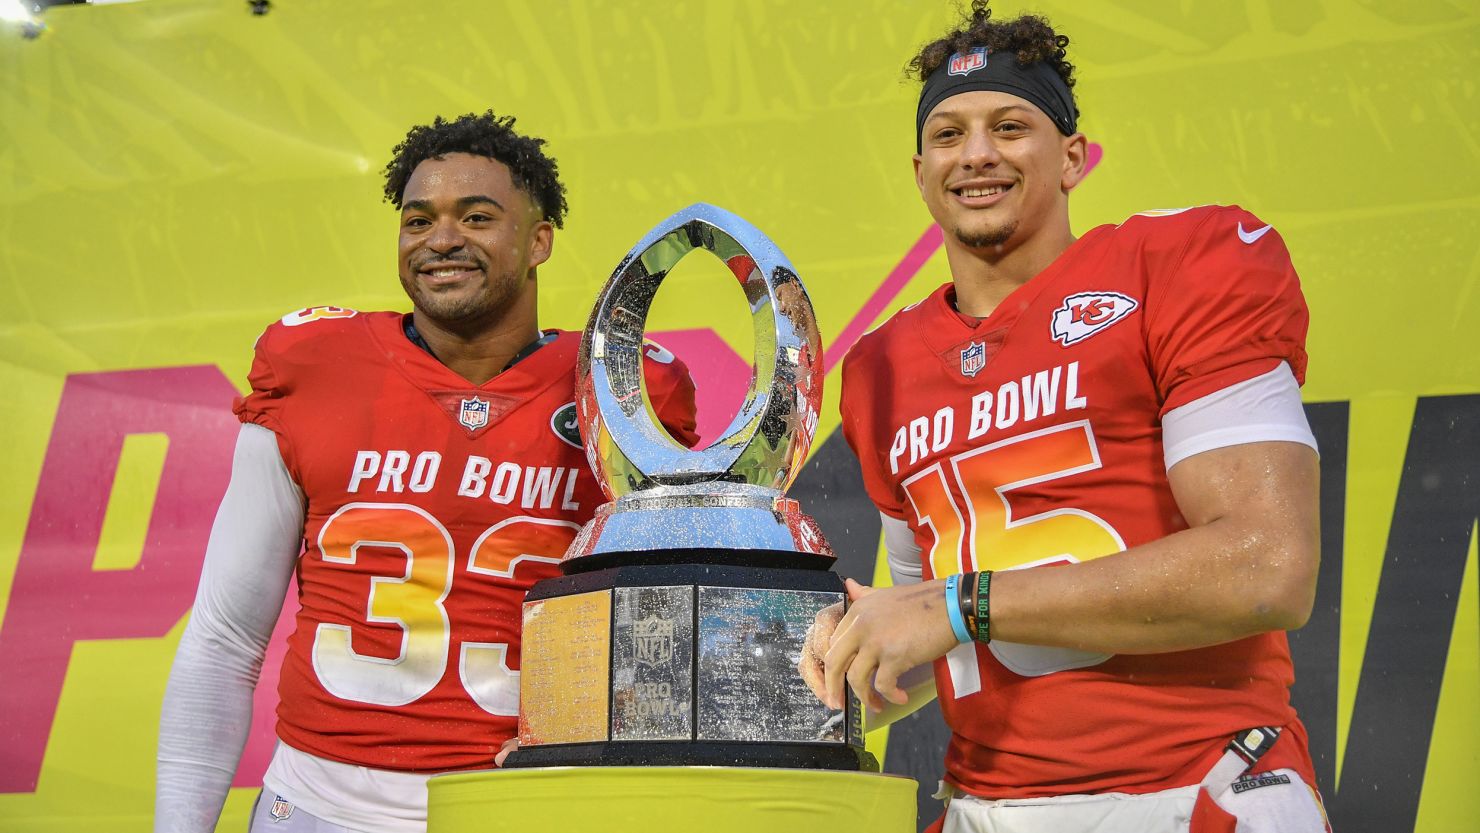 Jamal Adams, left, of the New York Jets and Patrick Mahomes of the Kansas City Chiefs were the co-MVP's of the 2019 NFL Pro Bowl in Orlando, Florida.